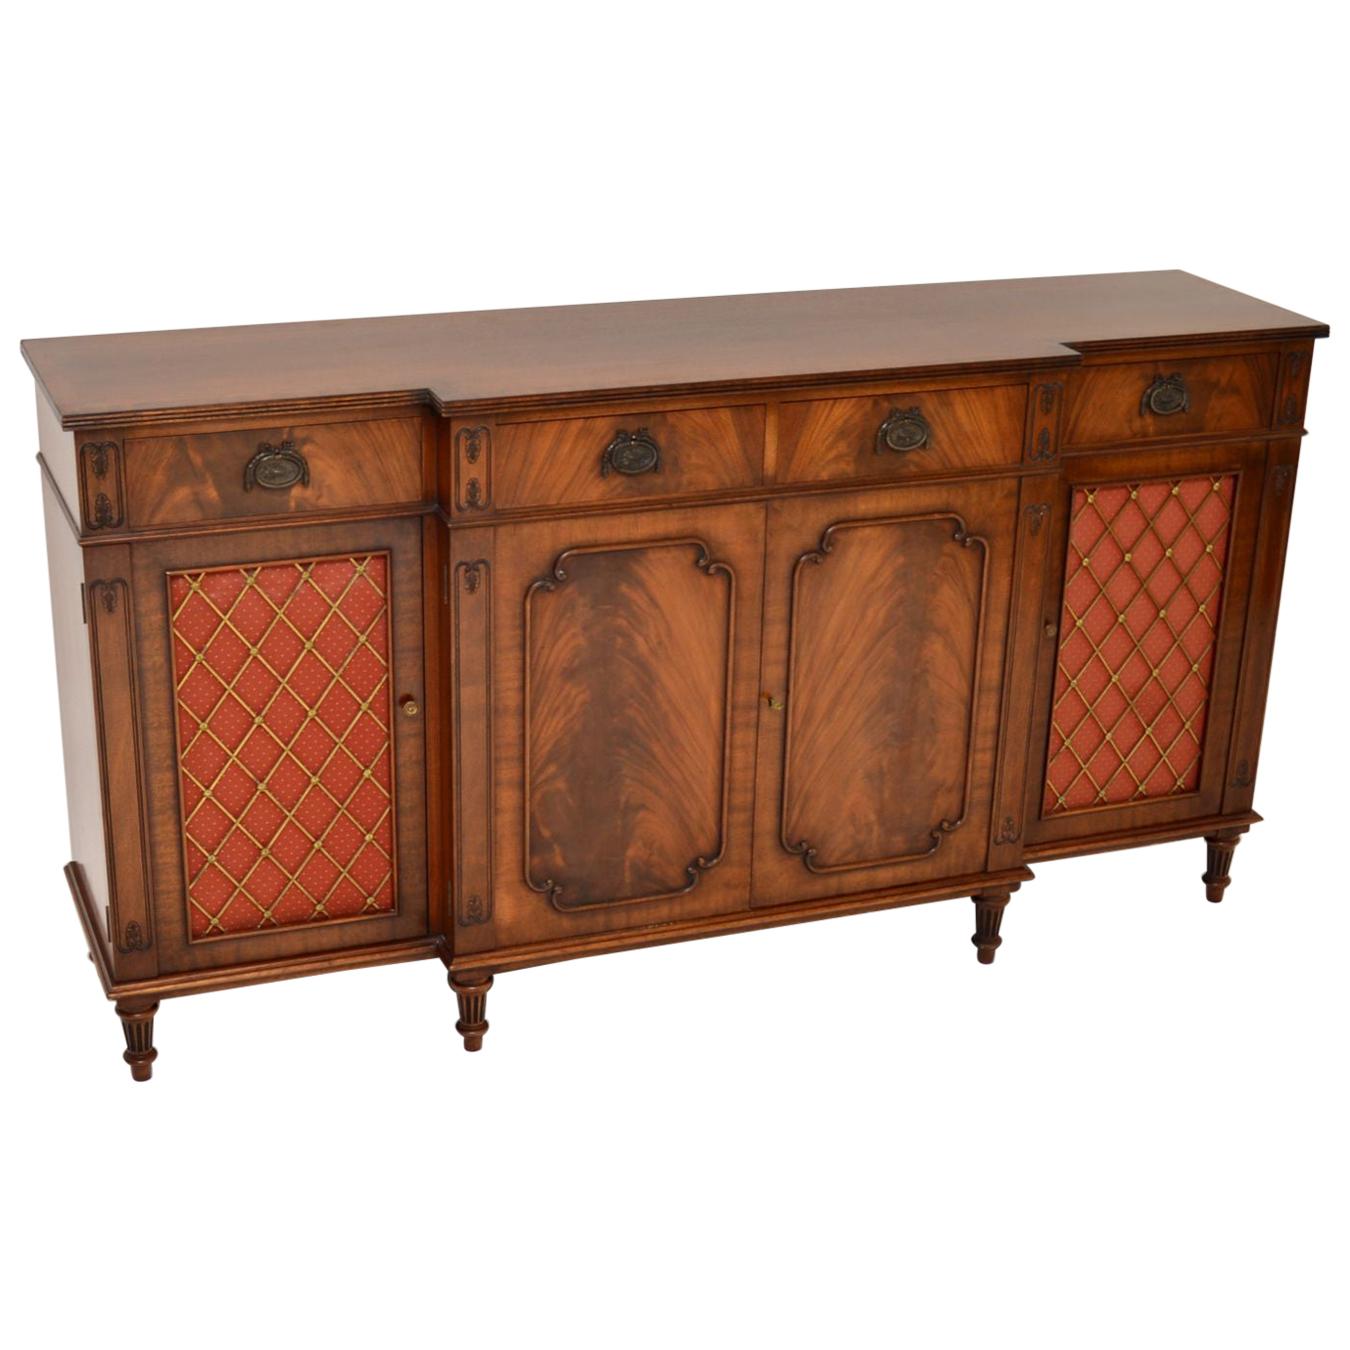 Antique Regency Style Mahogany Grill Front Sideboard